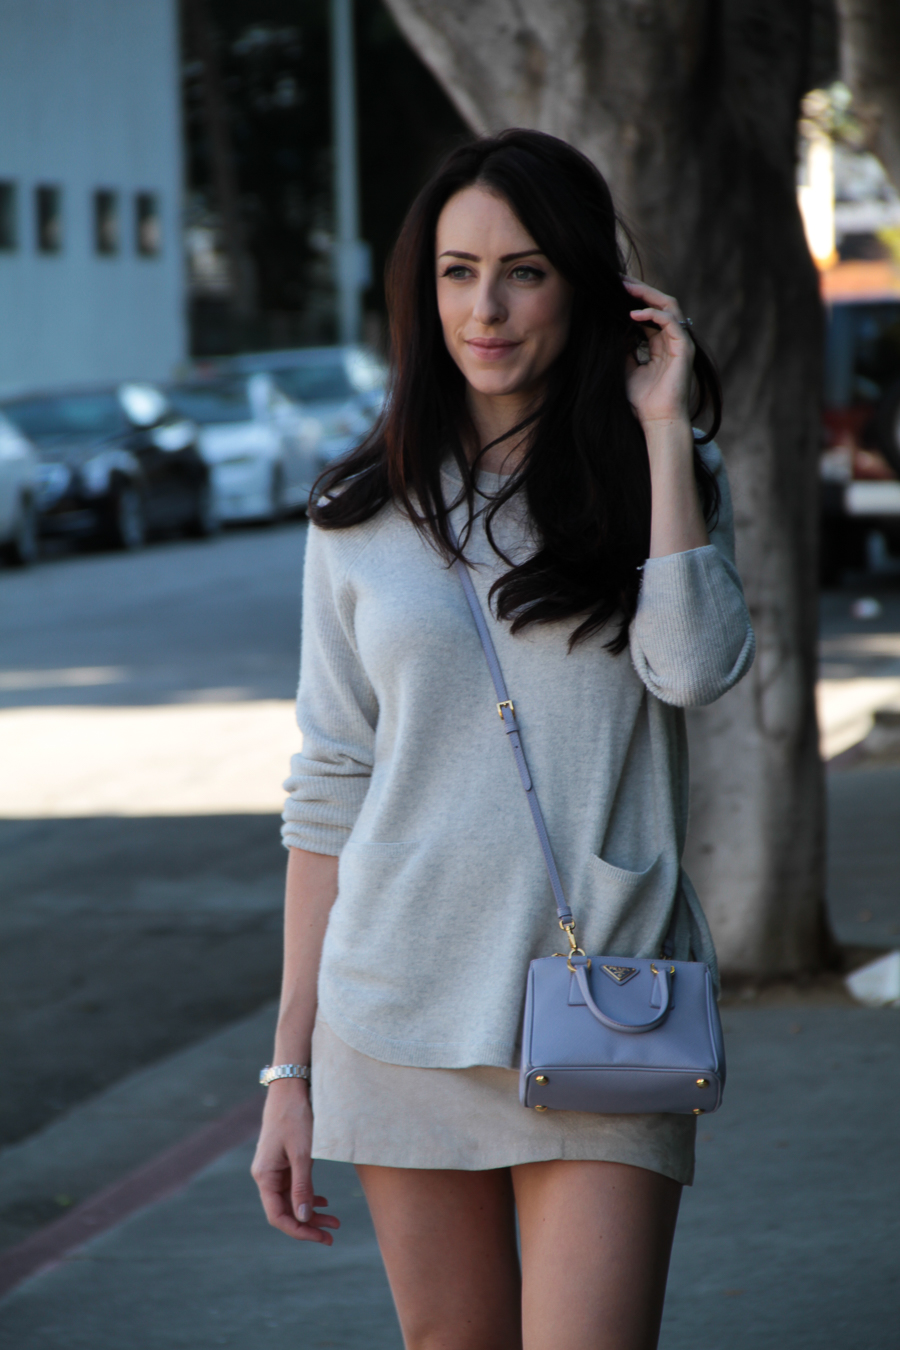 clutch and carry on - sabrina chakici - travel & style blog - LA street style - catherine taylor photography-3